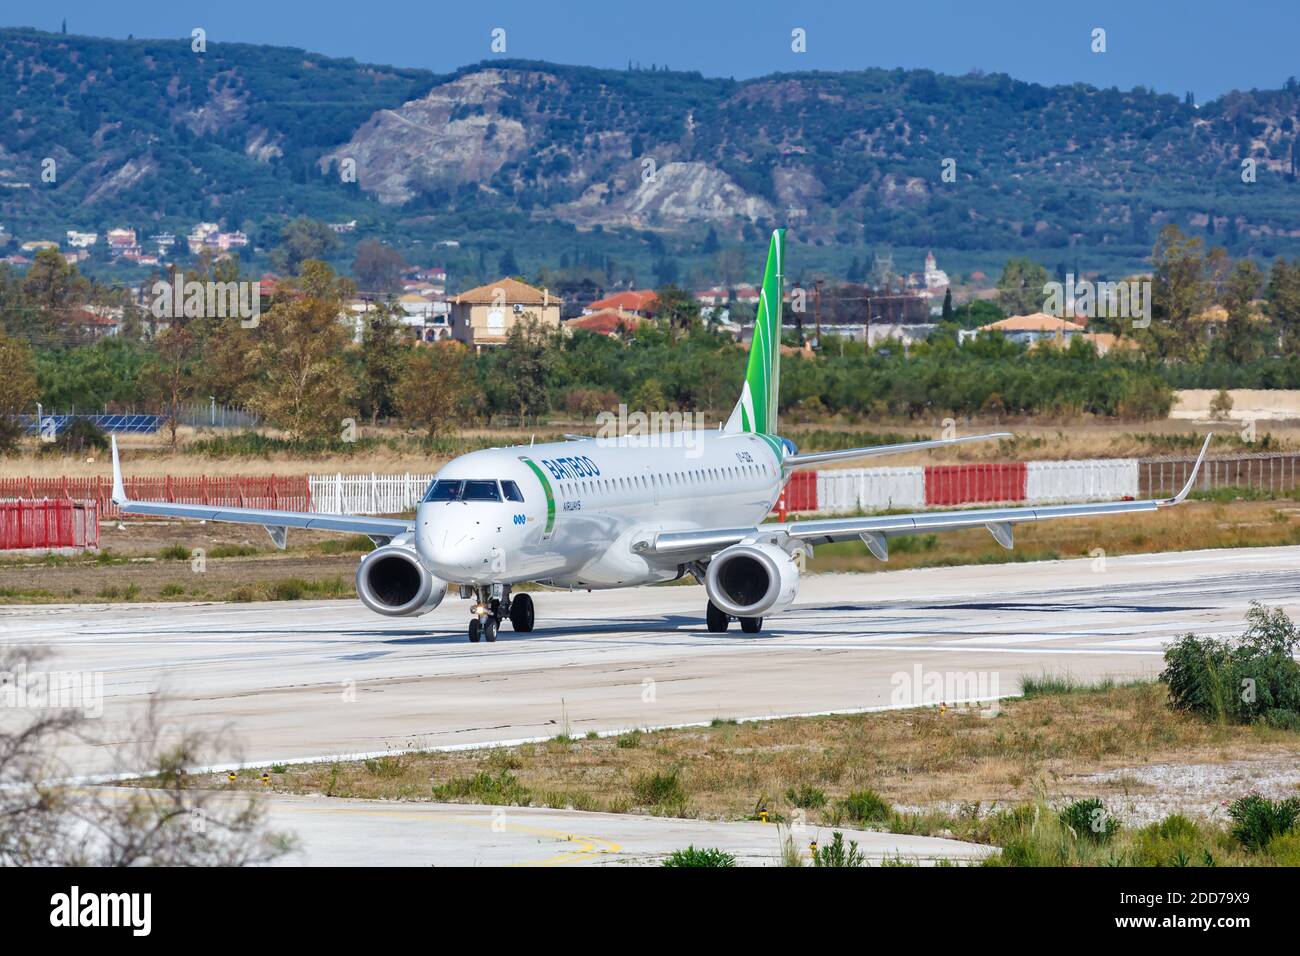 Zakynthos, Greece - September 21, 2020: Bamboo Airways Embraer 195 airplane at Zakynthos Airport in Greece. Stock Photo